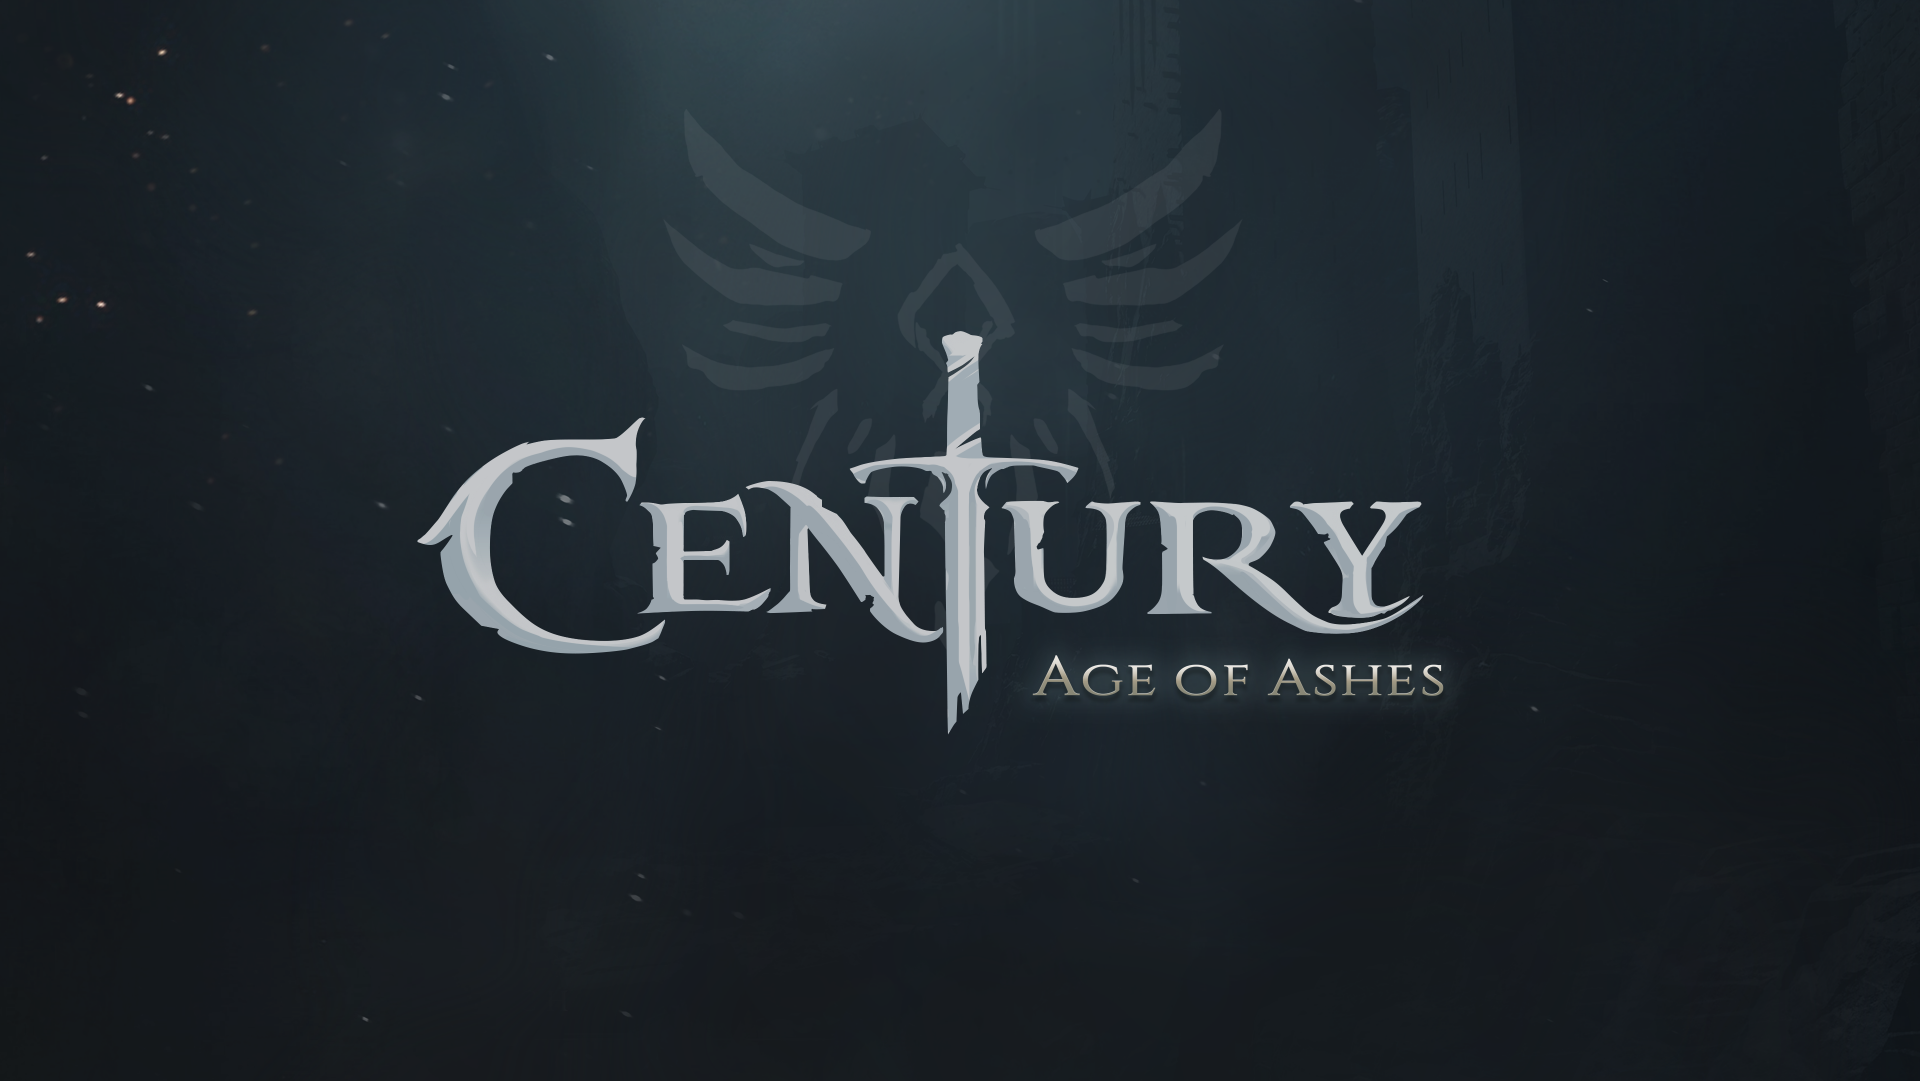 century: age of ashes editions